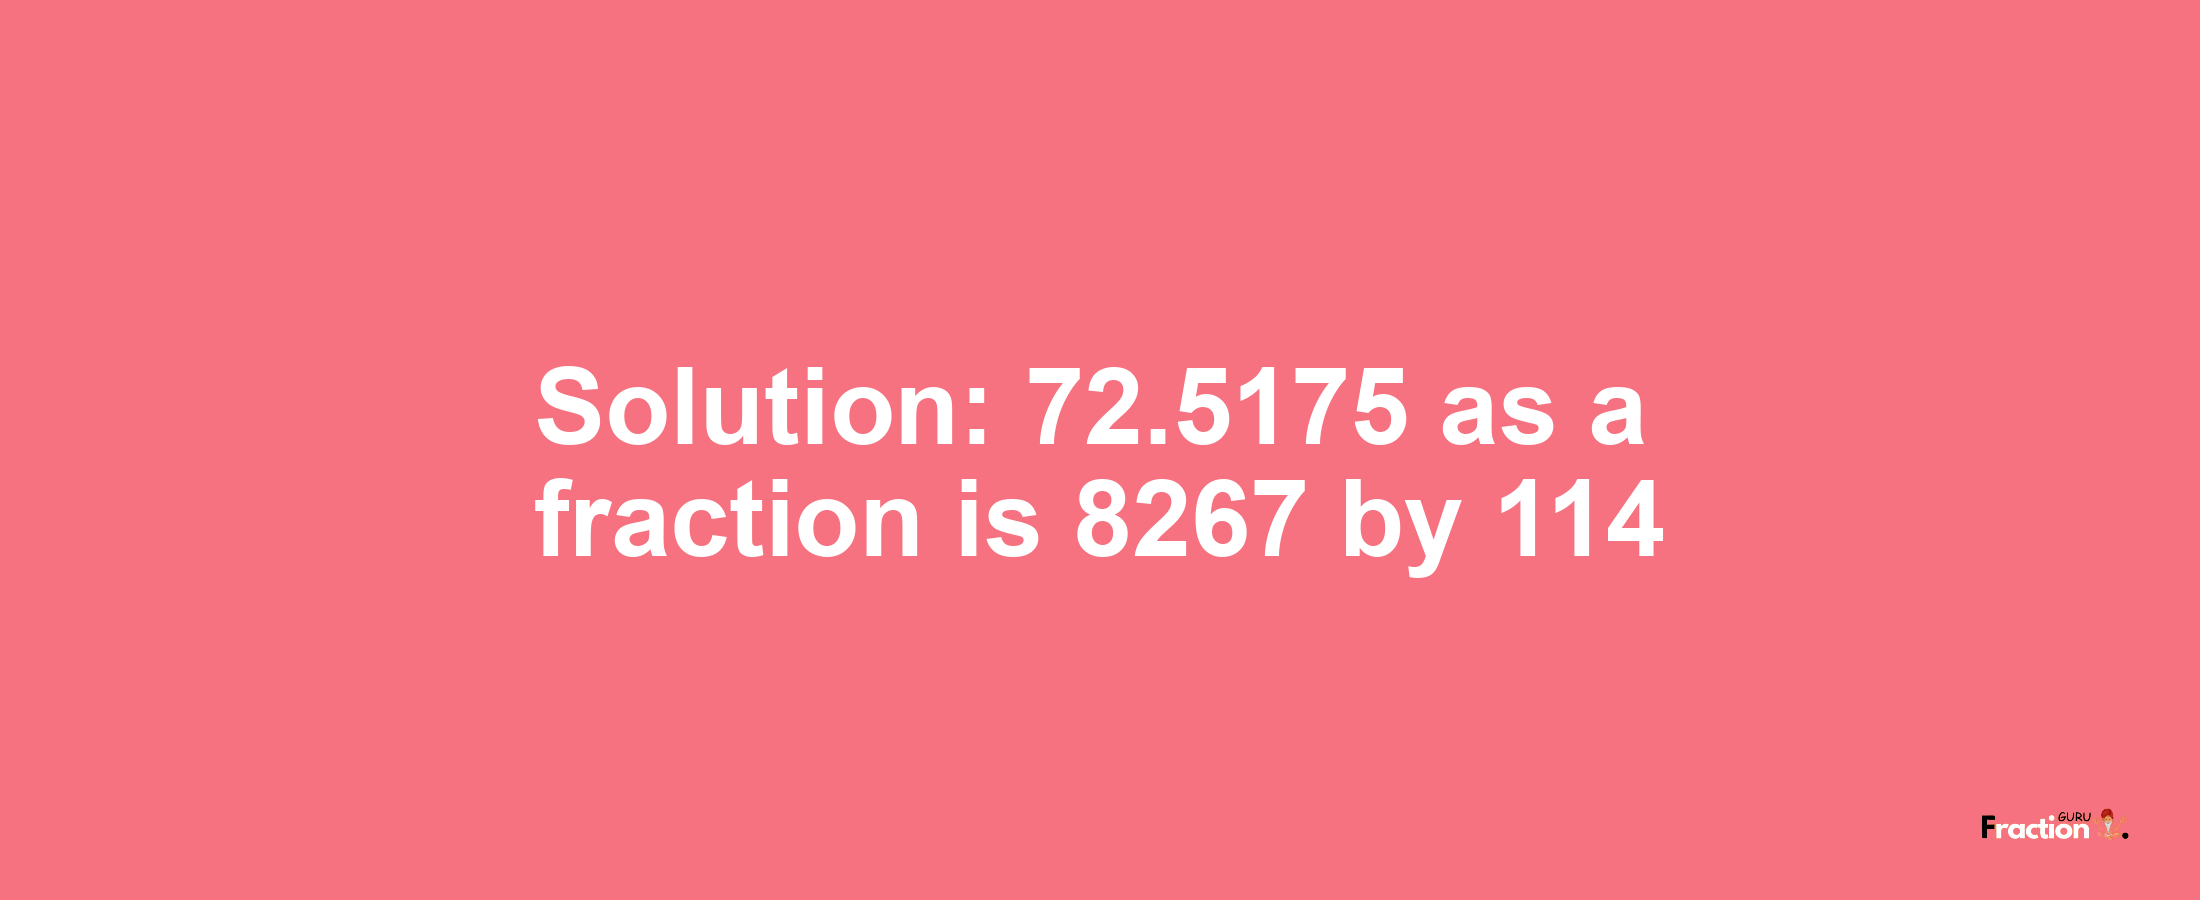 Solution:72.5175 as a fraction is 8267/114